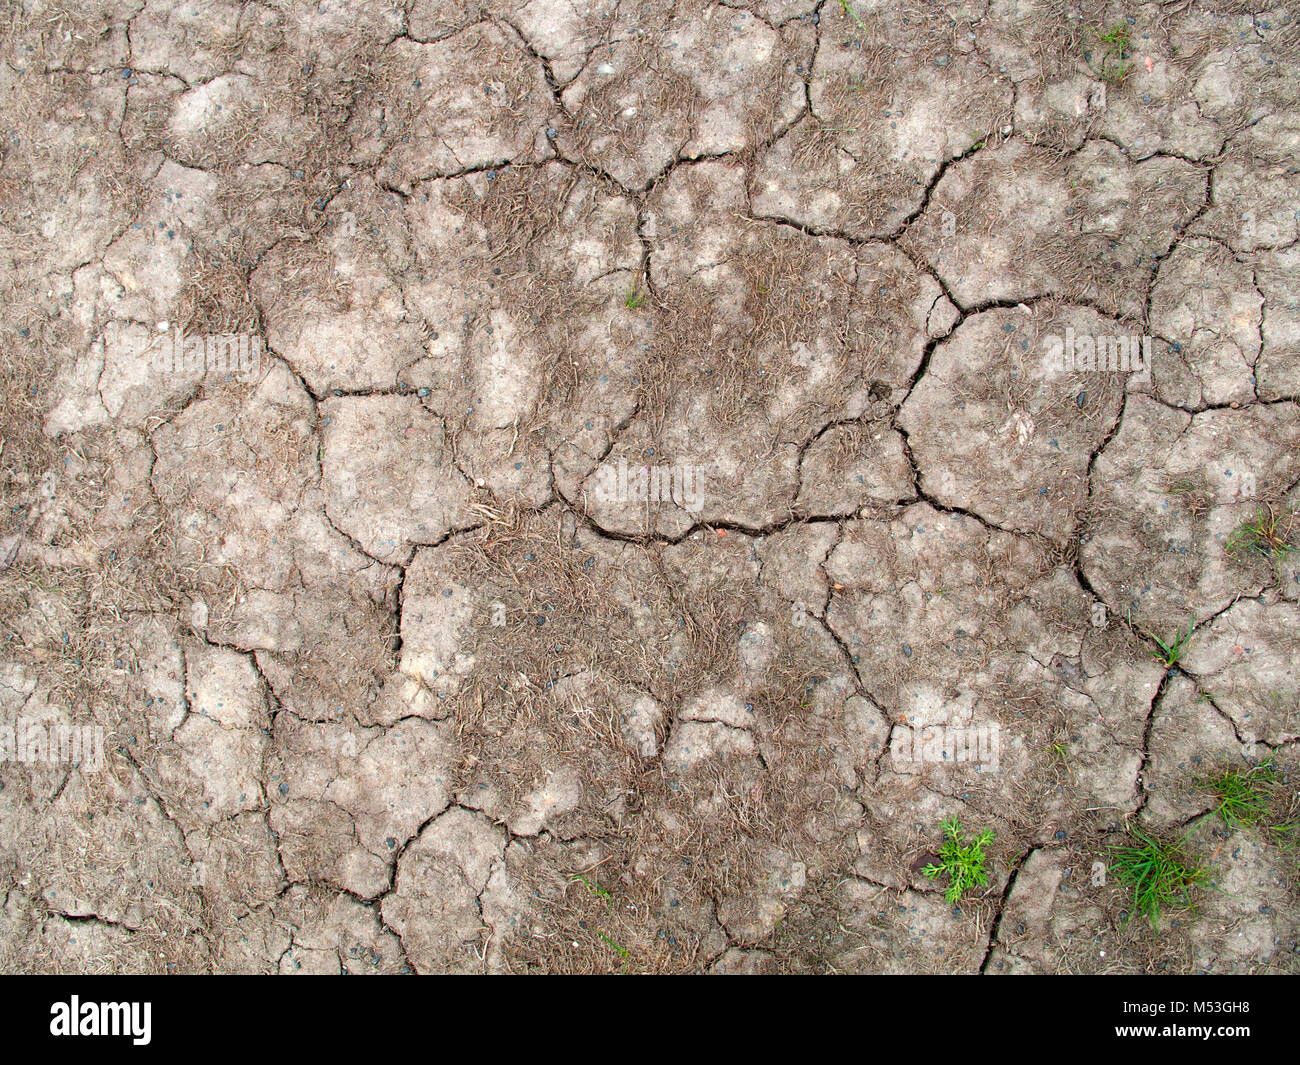 Cracked soil with small bushes of living grass, may be used as background Stock Photo